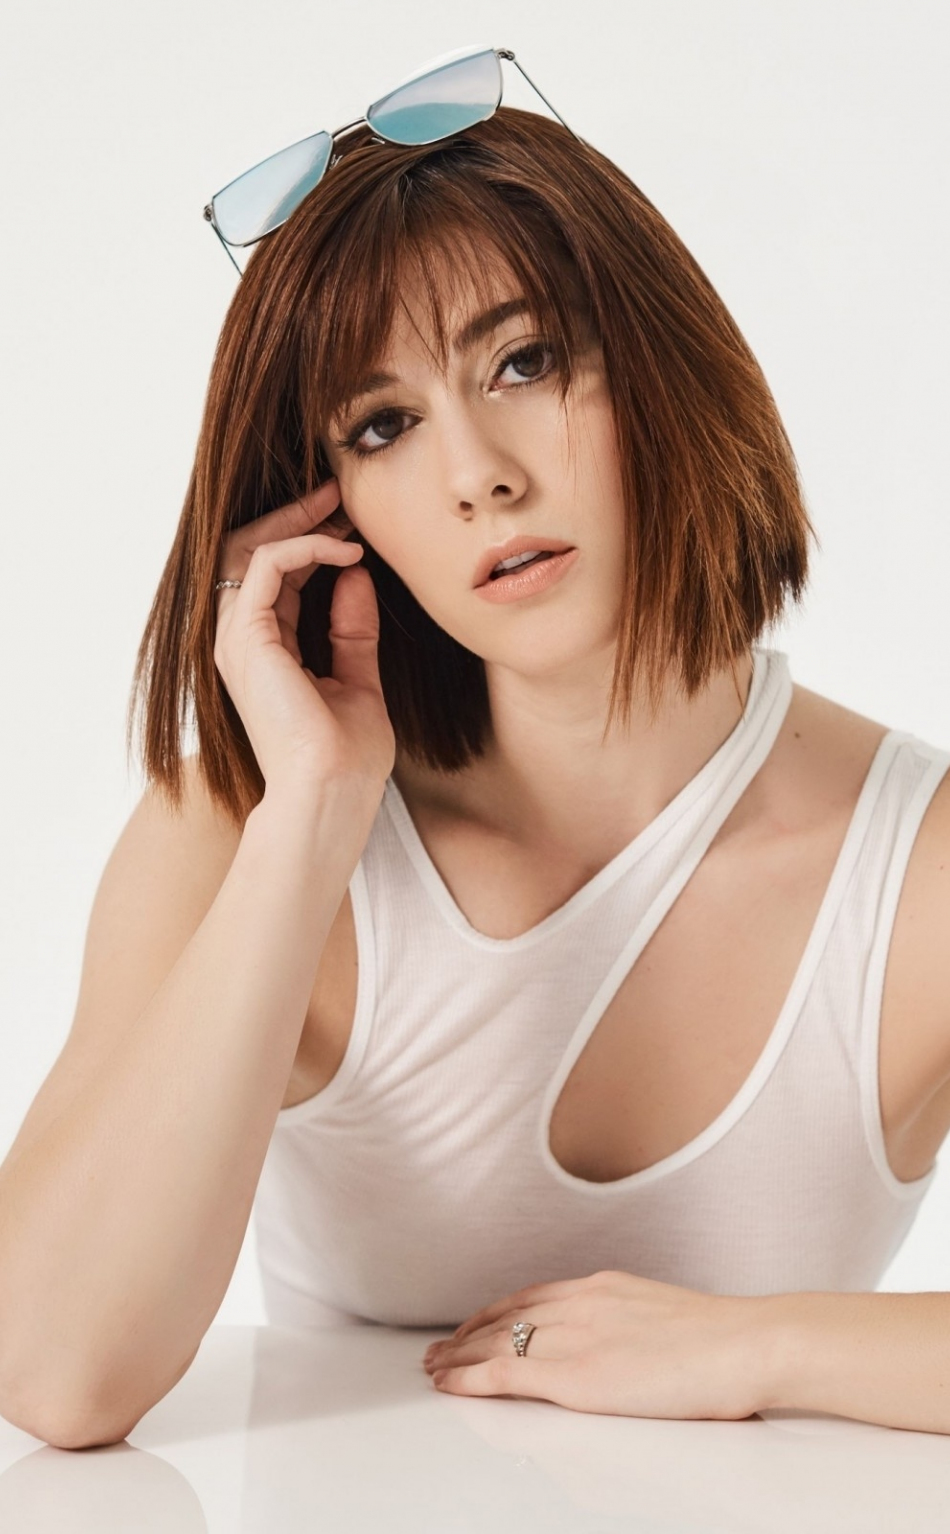 Download wallpaper 950x1534 mary elizabeth winstead, red head, celebrity,  iphone, 950x1534 hd background, 14981